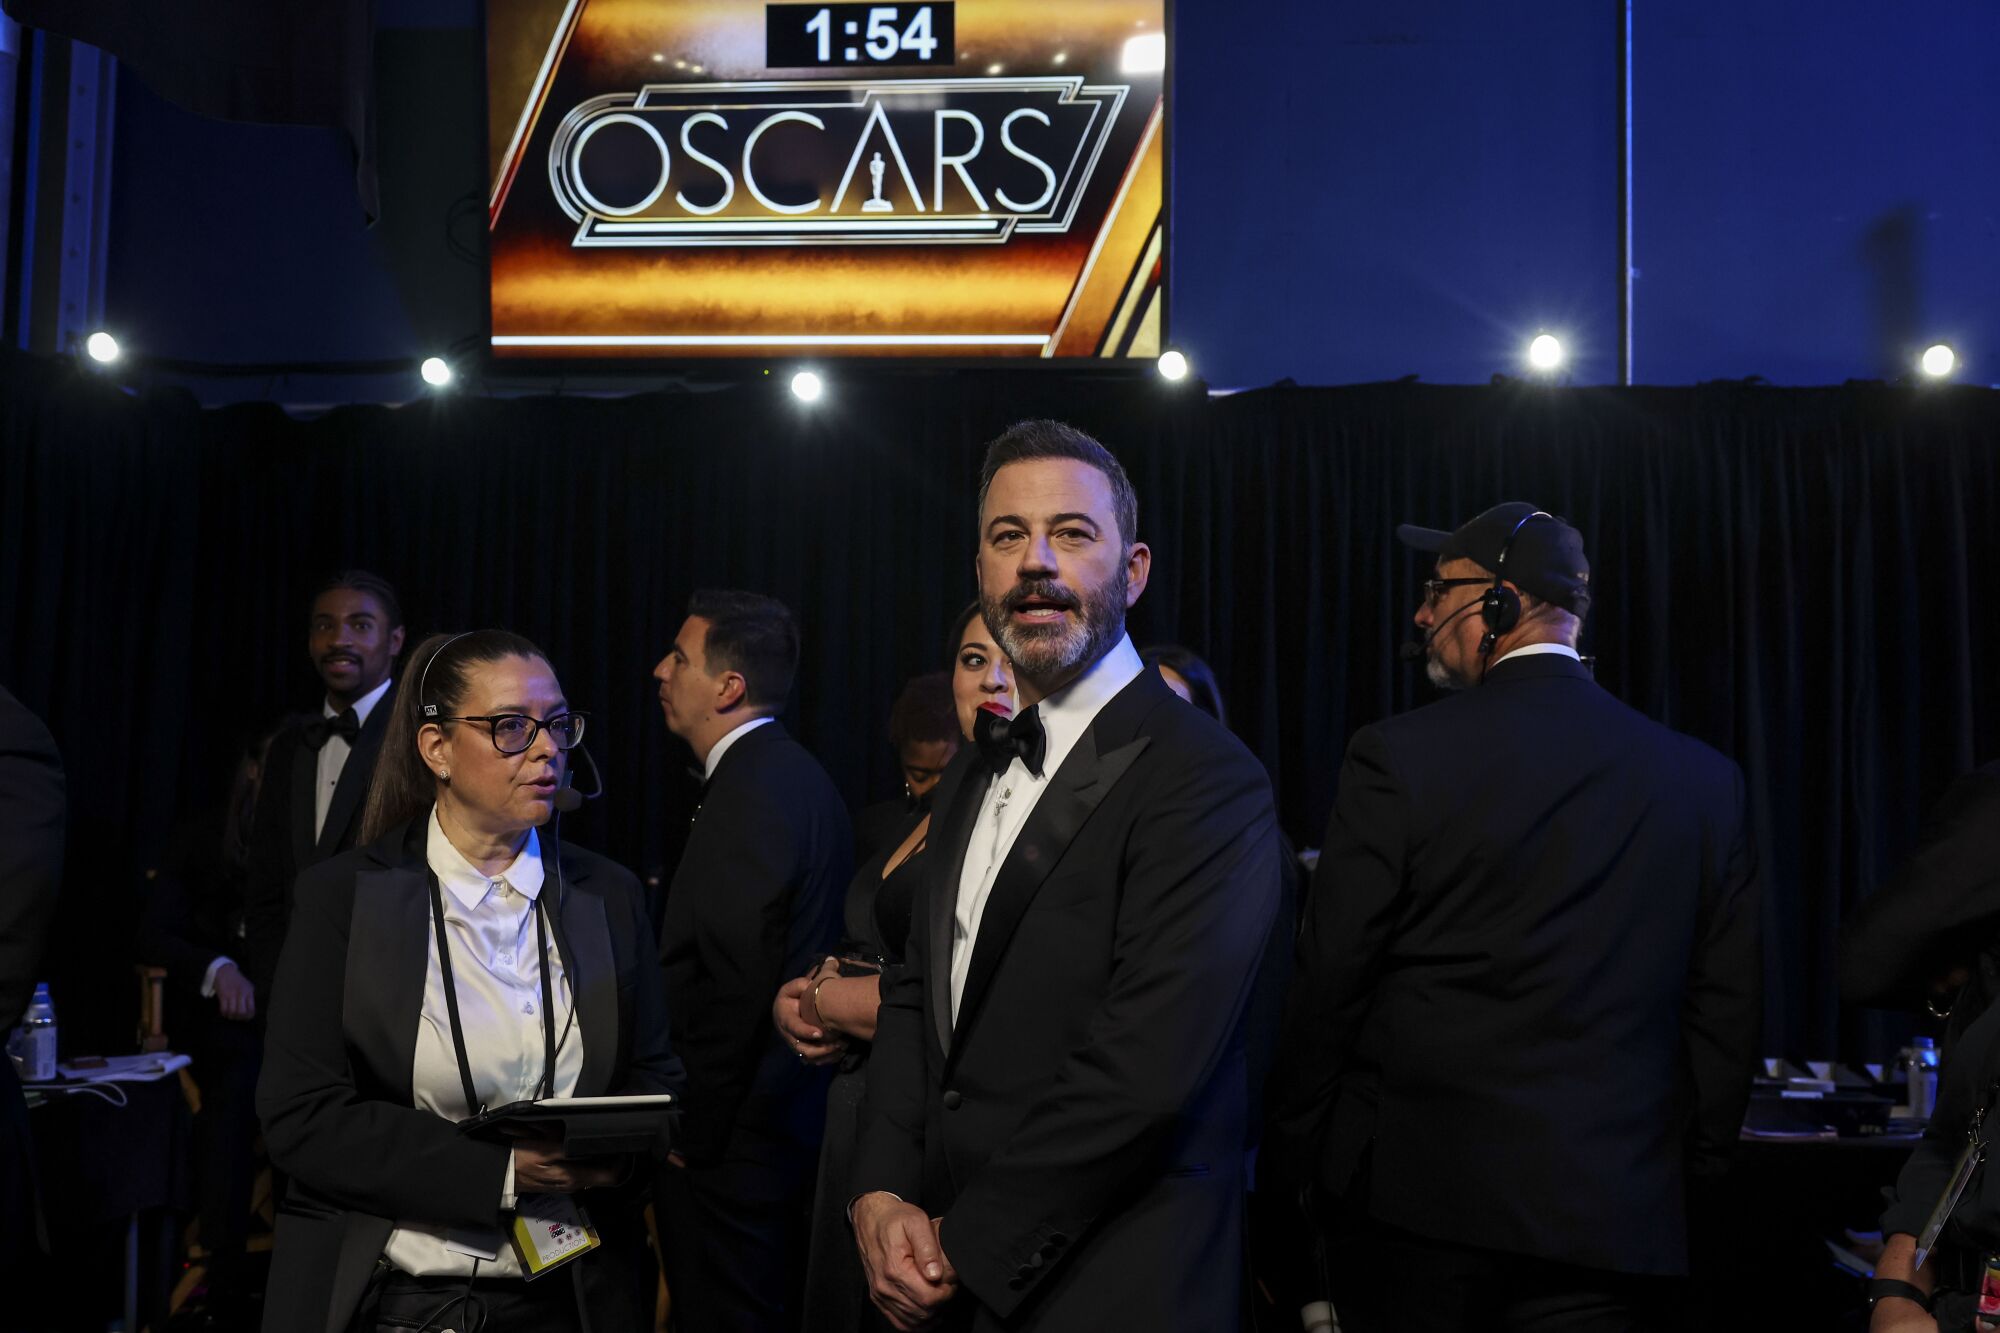 Man in tuxedo under Oscar sign stands among crew members